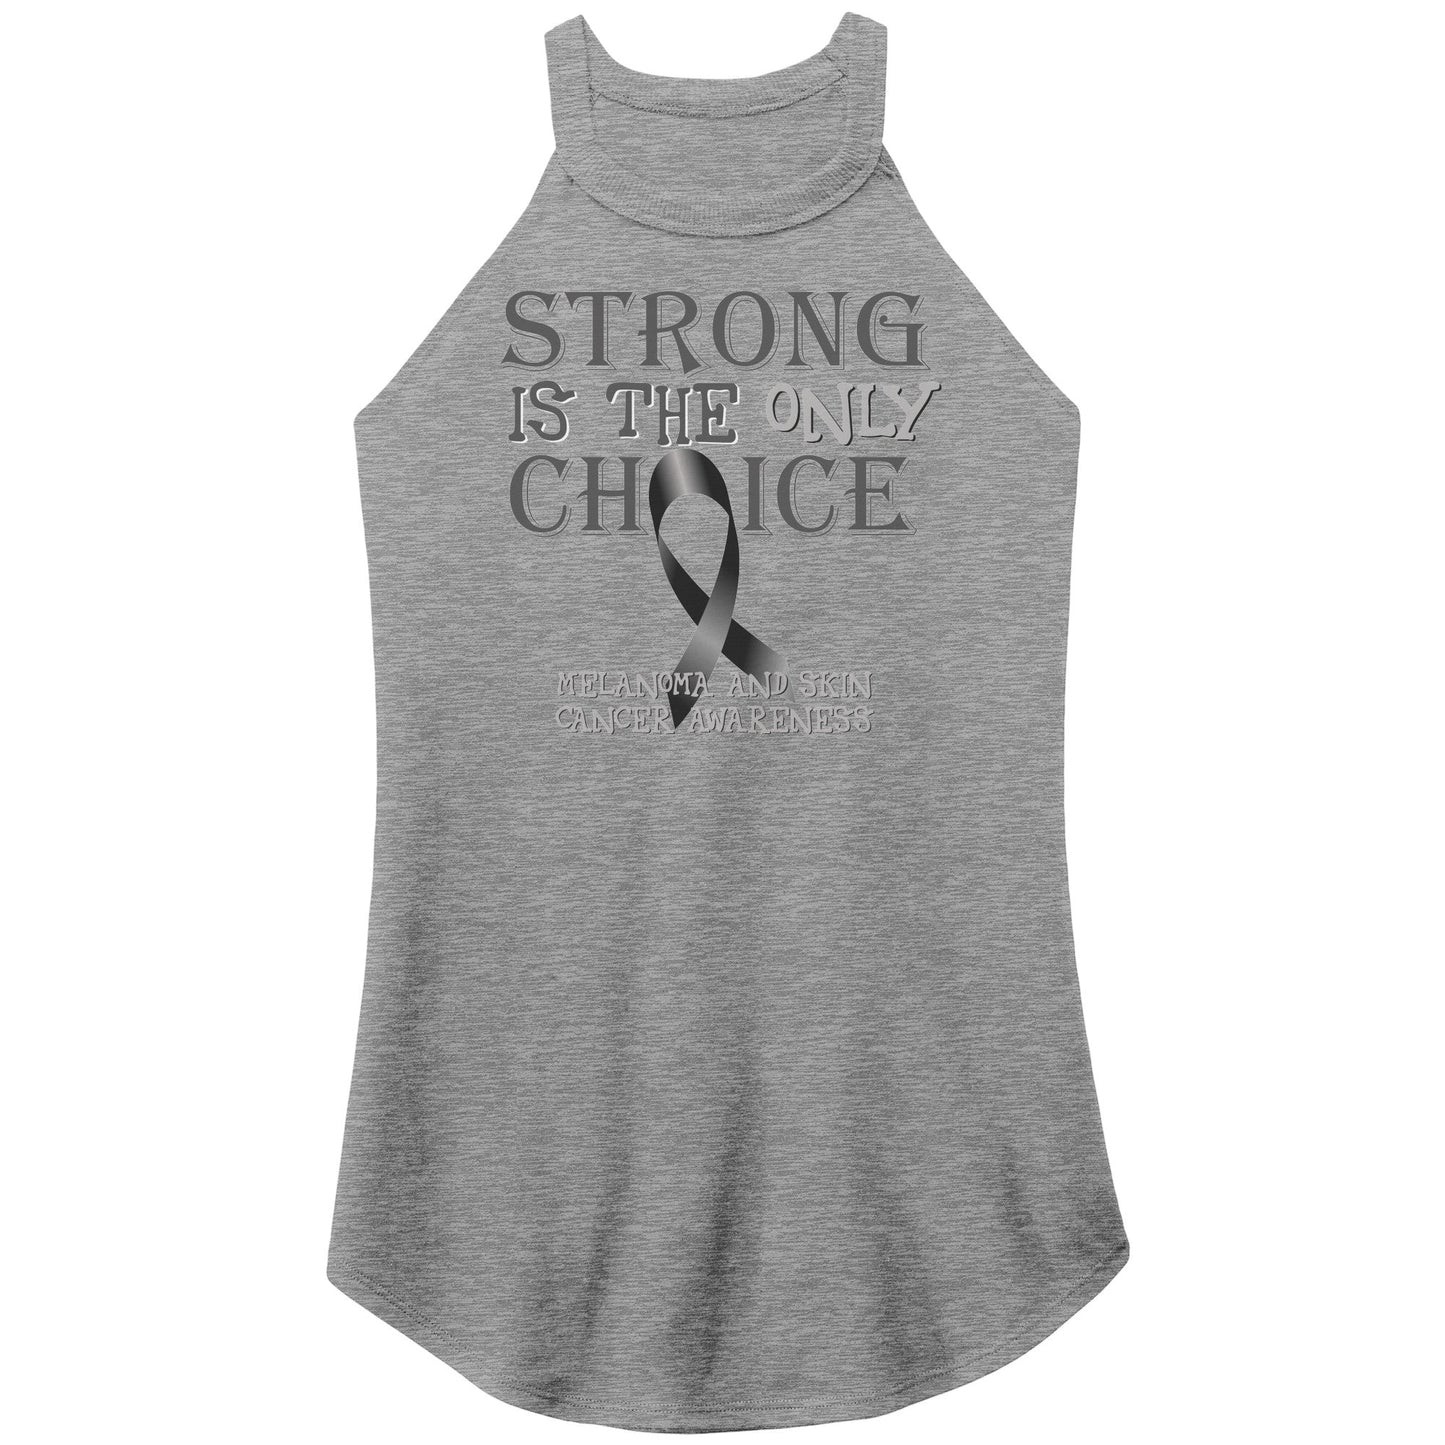 Strong is the Only Choice -Melanoma and Skin Cancer Awareness T-Shirt, Hoodie, Tank |x|